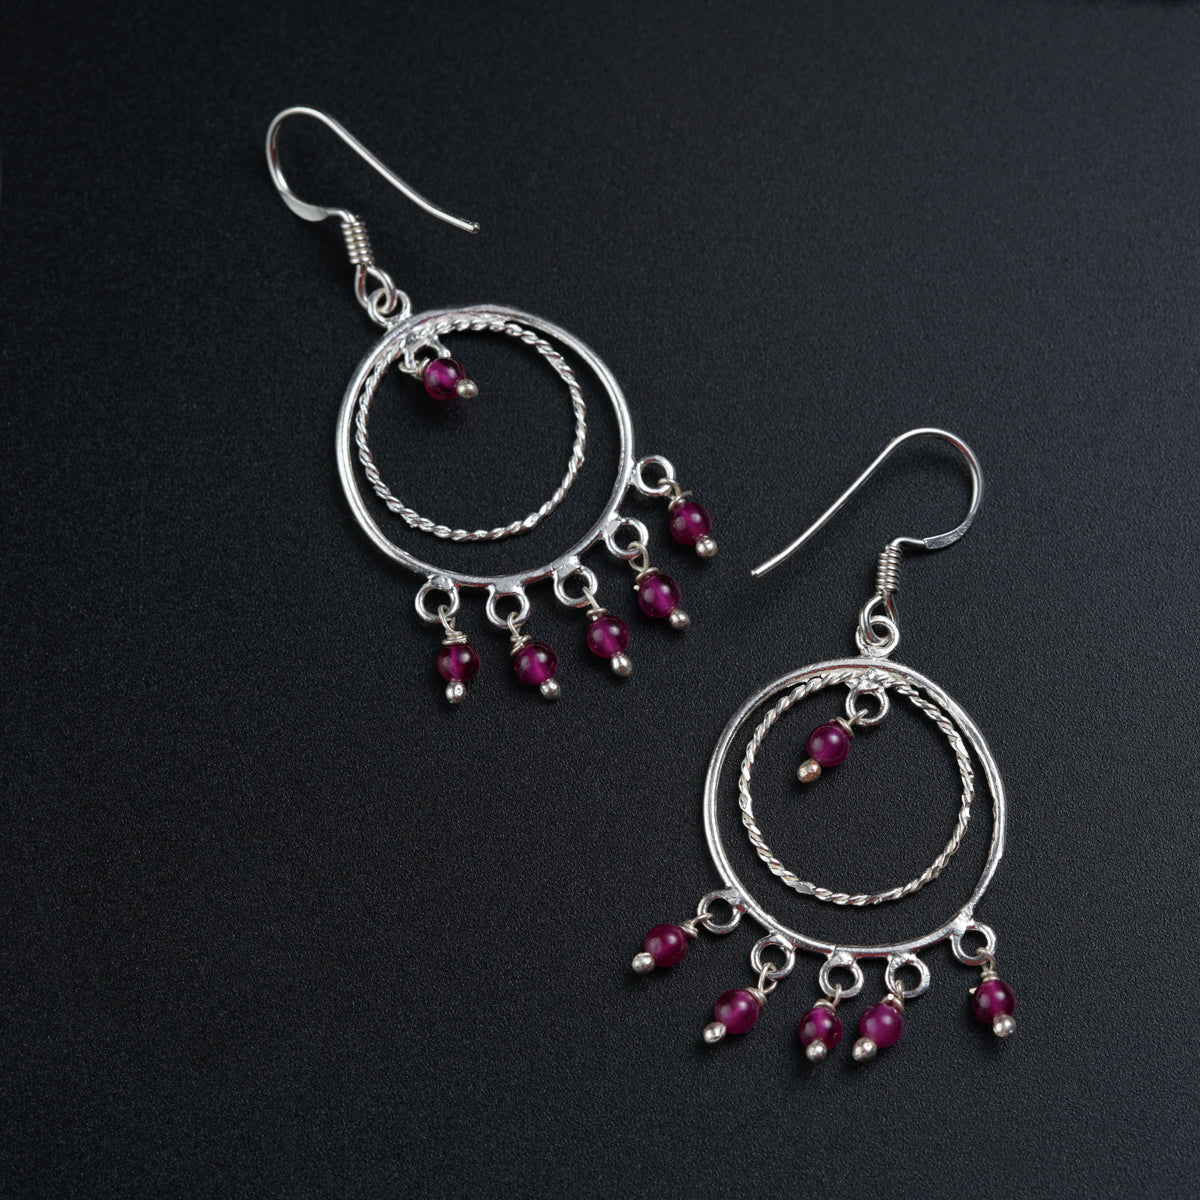 a pair of silver hoop earrings with red beads